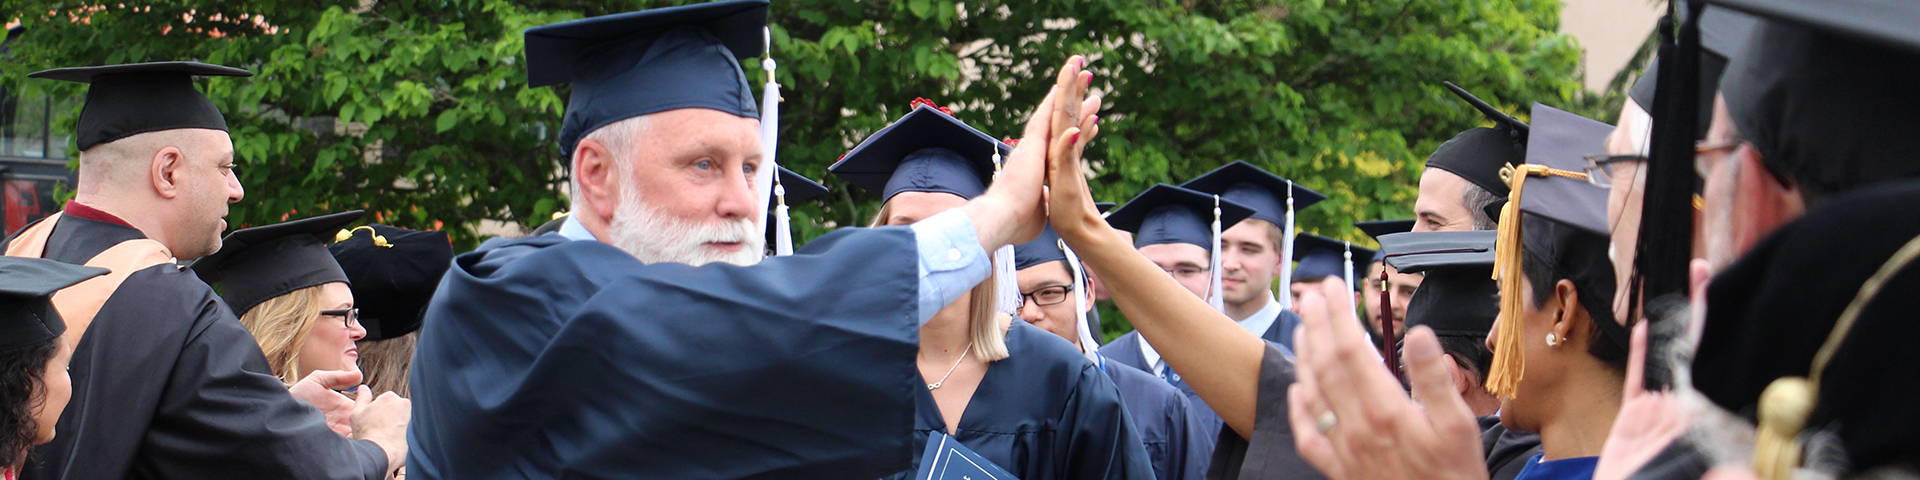 Adult Learner high fiving Faculty after Graduation